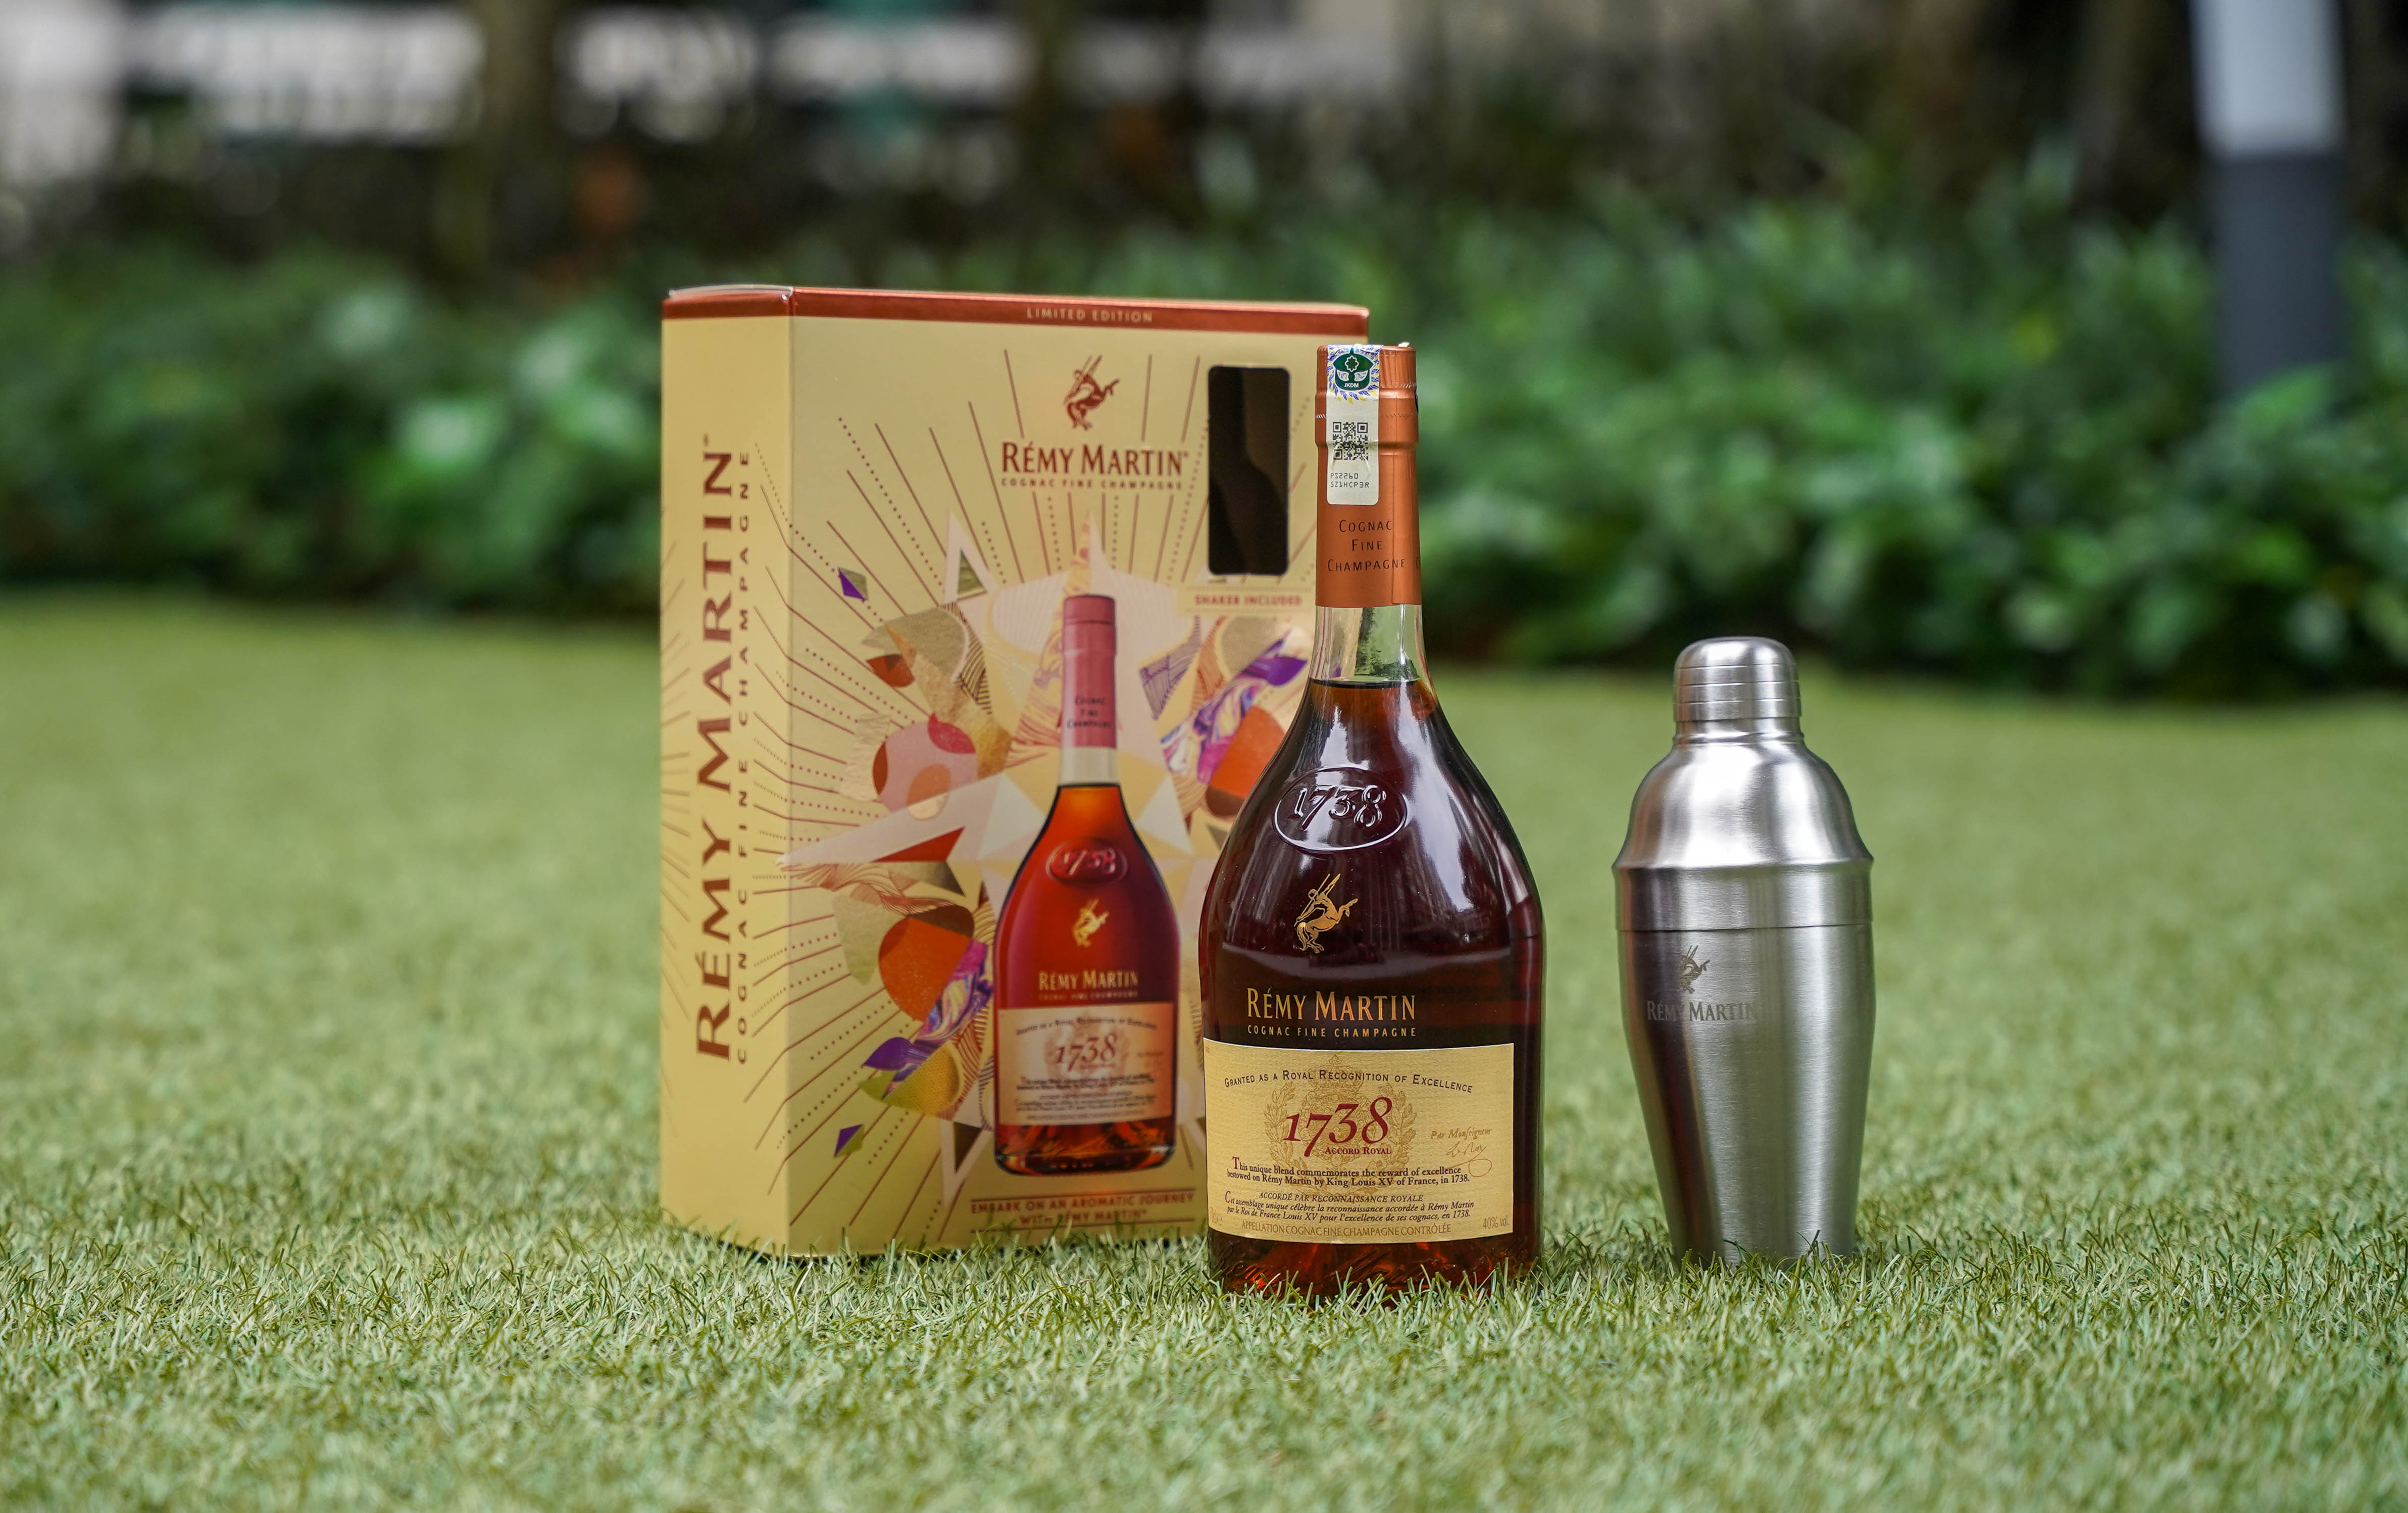 rémy martin's harmonia festive gift collection ushers in the ultimate 2023 lunar new year